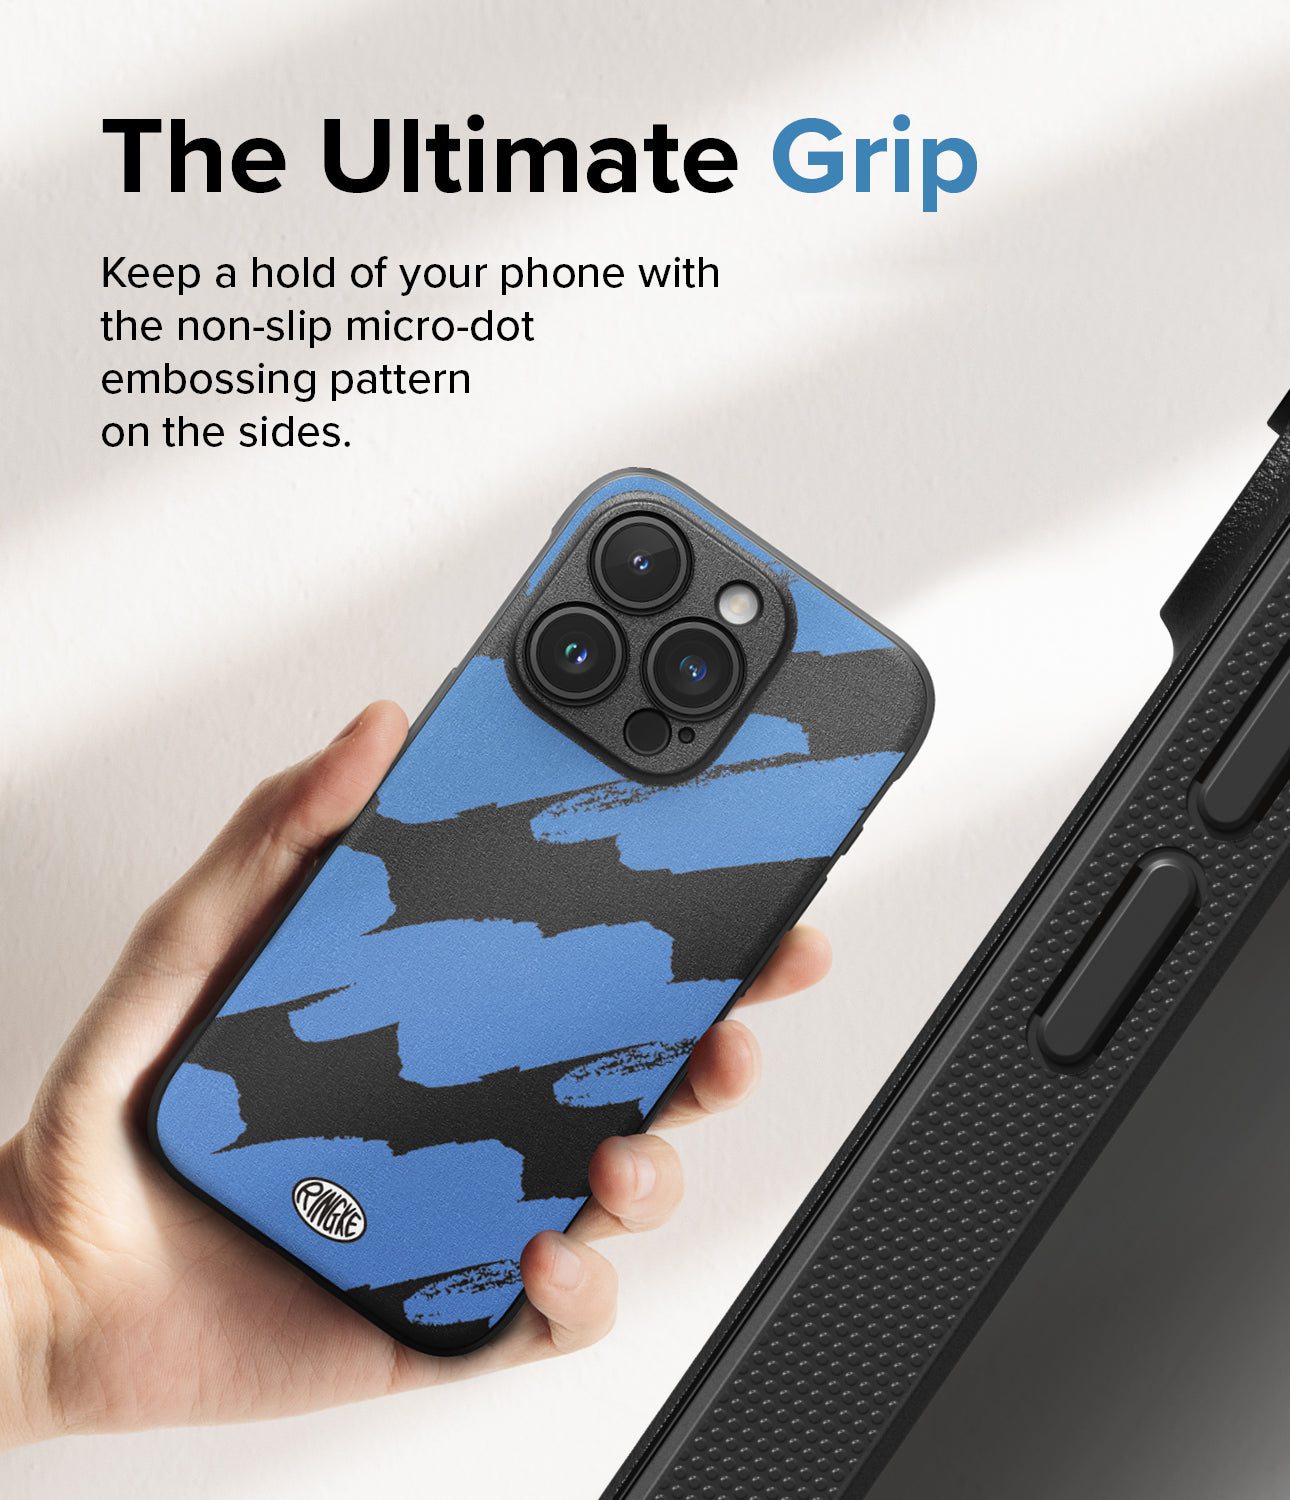 iPhone 15 Pro Case | Onyx Design - Blue Brush - The Ultimate Grip. Keep a hold of your phone with the non-slip micro-dot embossing pattern on the sides.